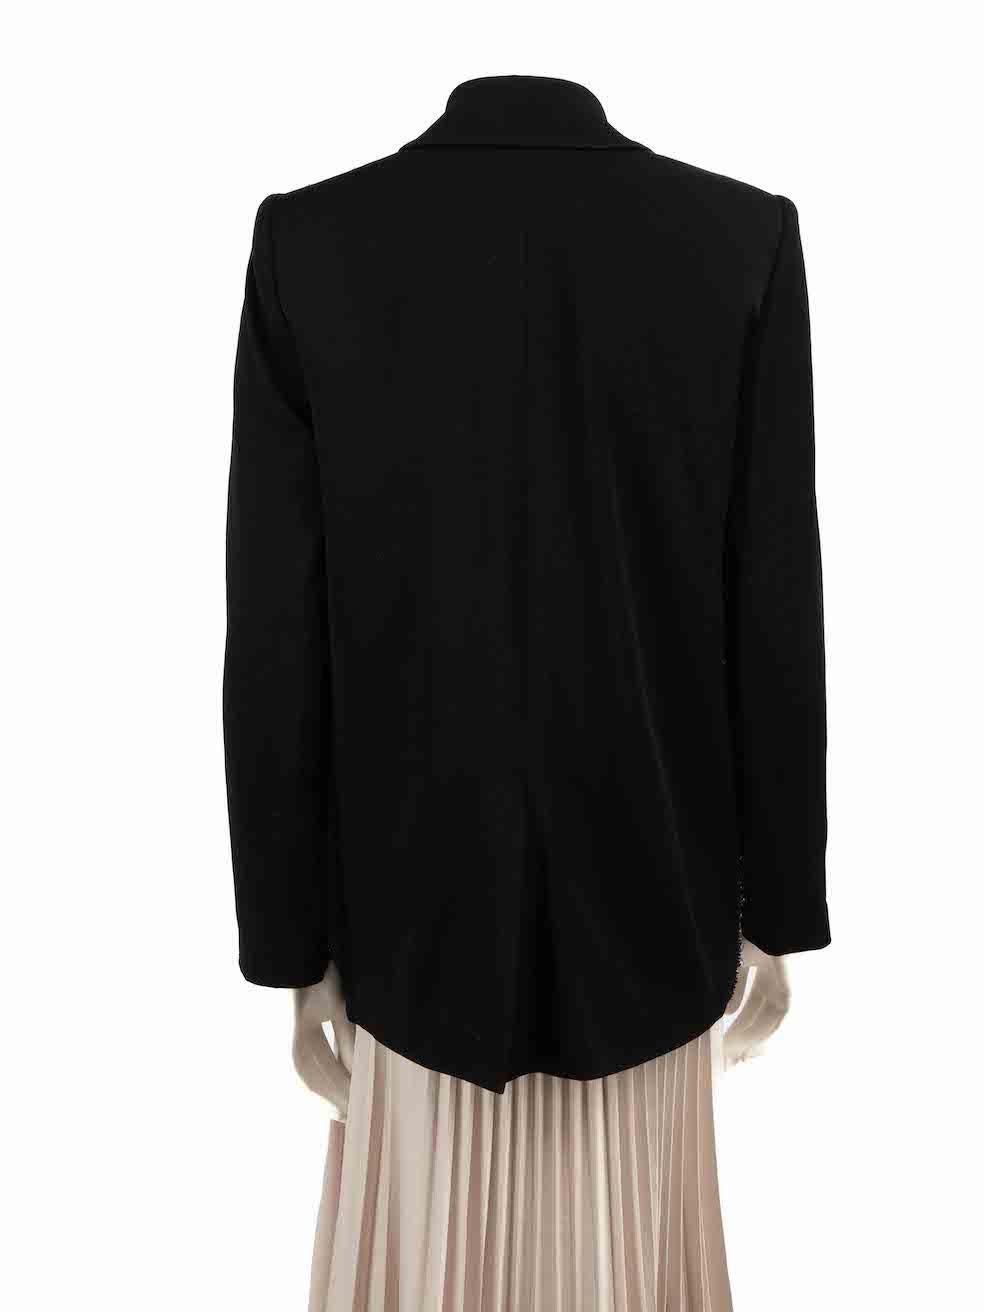 Alice + Olivia Black Crystal Embellished Blazer Size M In Good Condition For Sale In London, GB